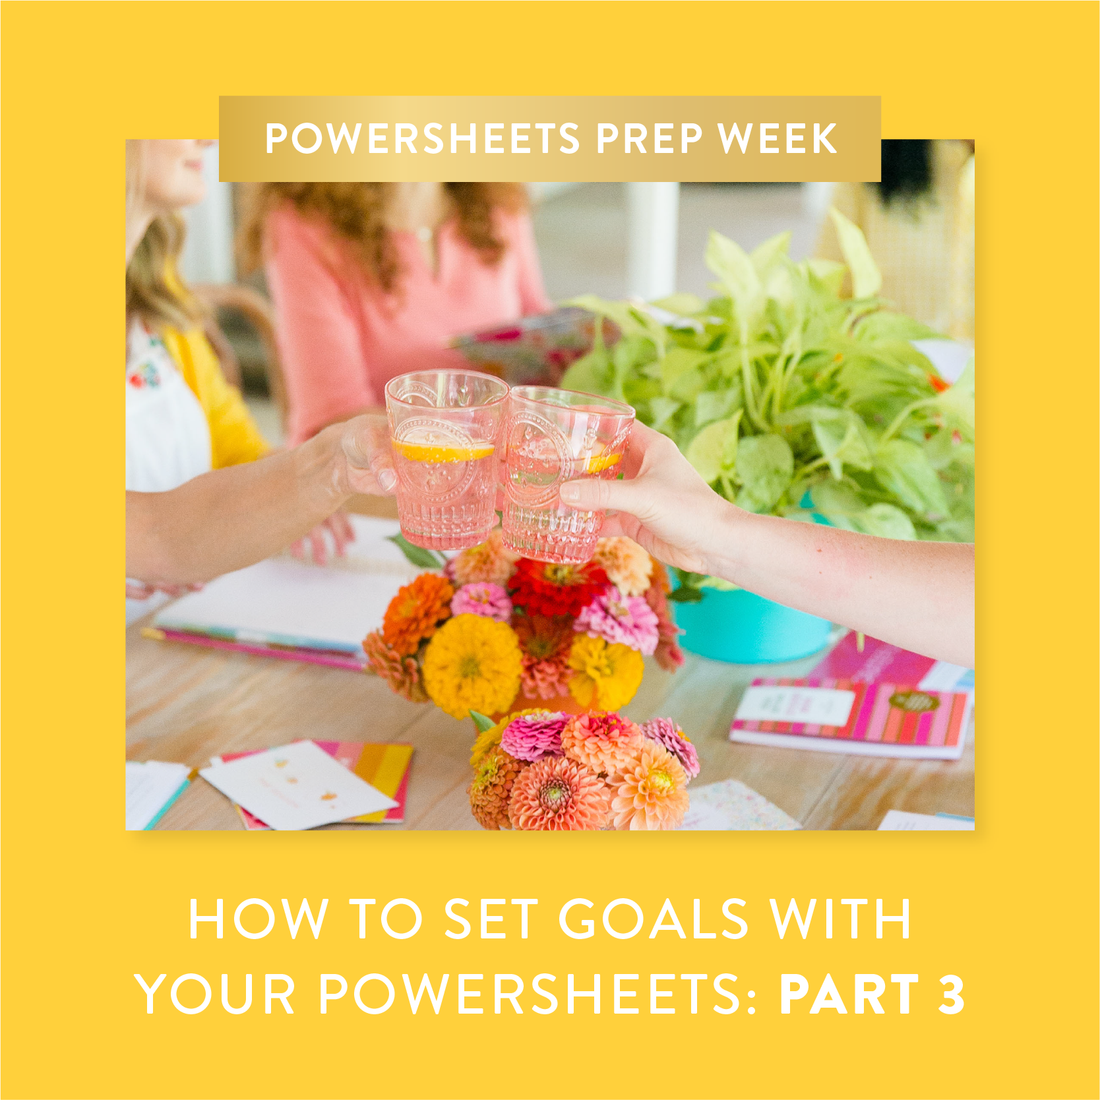 How to Set Goals With Your PowerSheets: Part 3